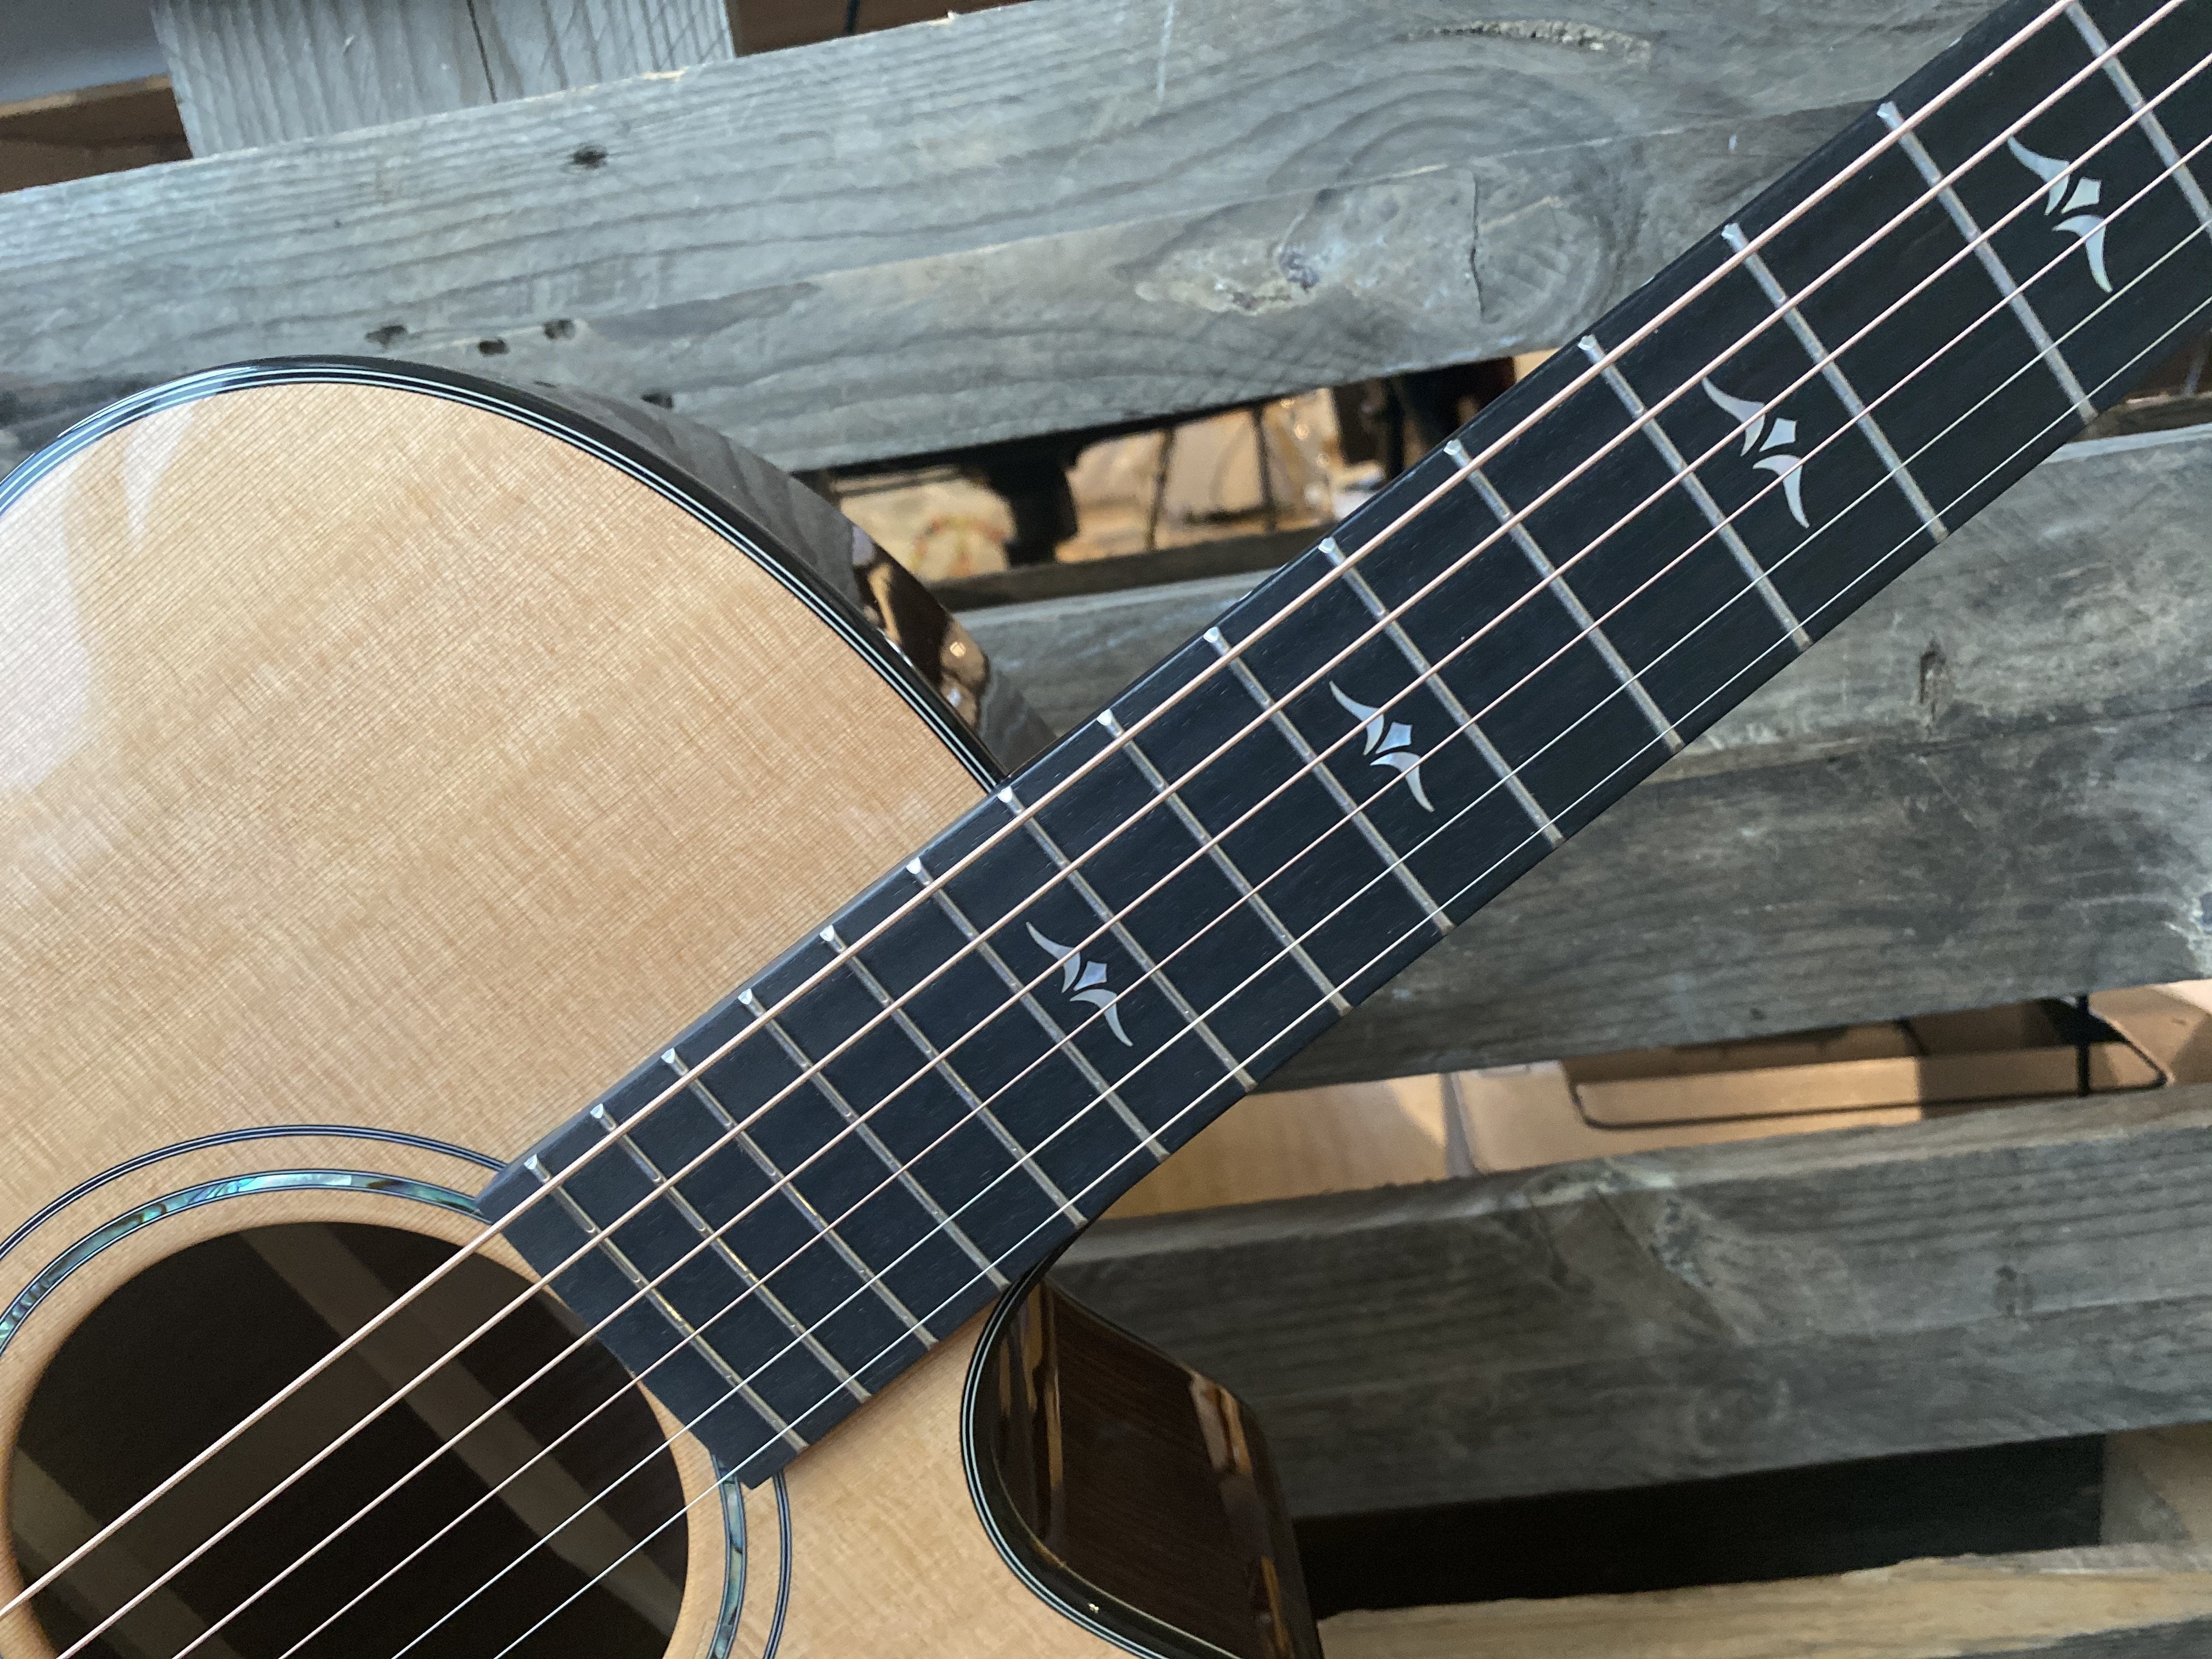 Furch Yellow Gc-CR 12 String Acoustic Guitar Including UK Exclusive Inlays & Over £100 Of Added Value FREE, Acoustic Guitar for sale at Richards Guitars.